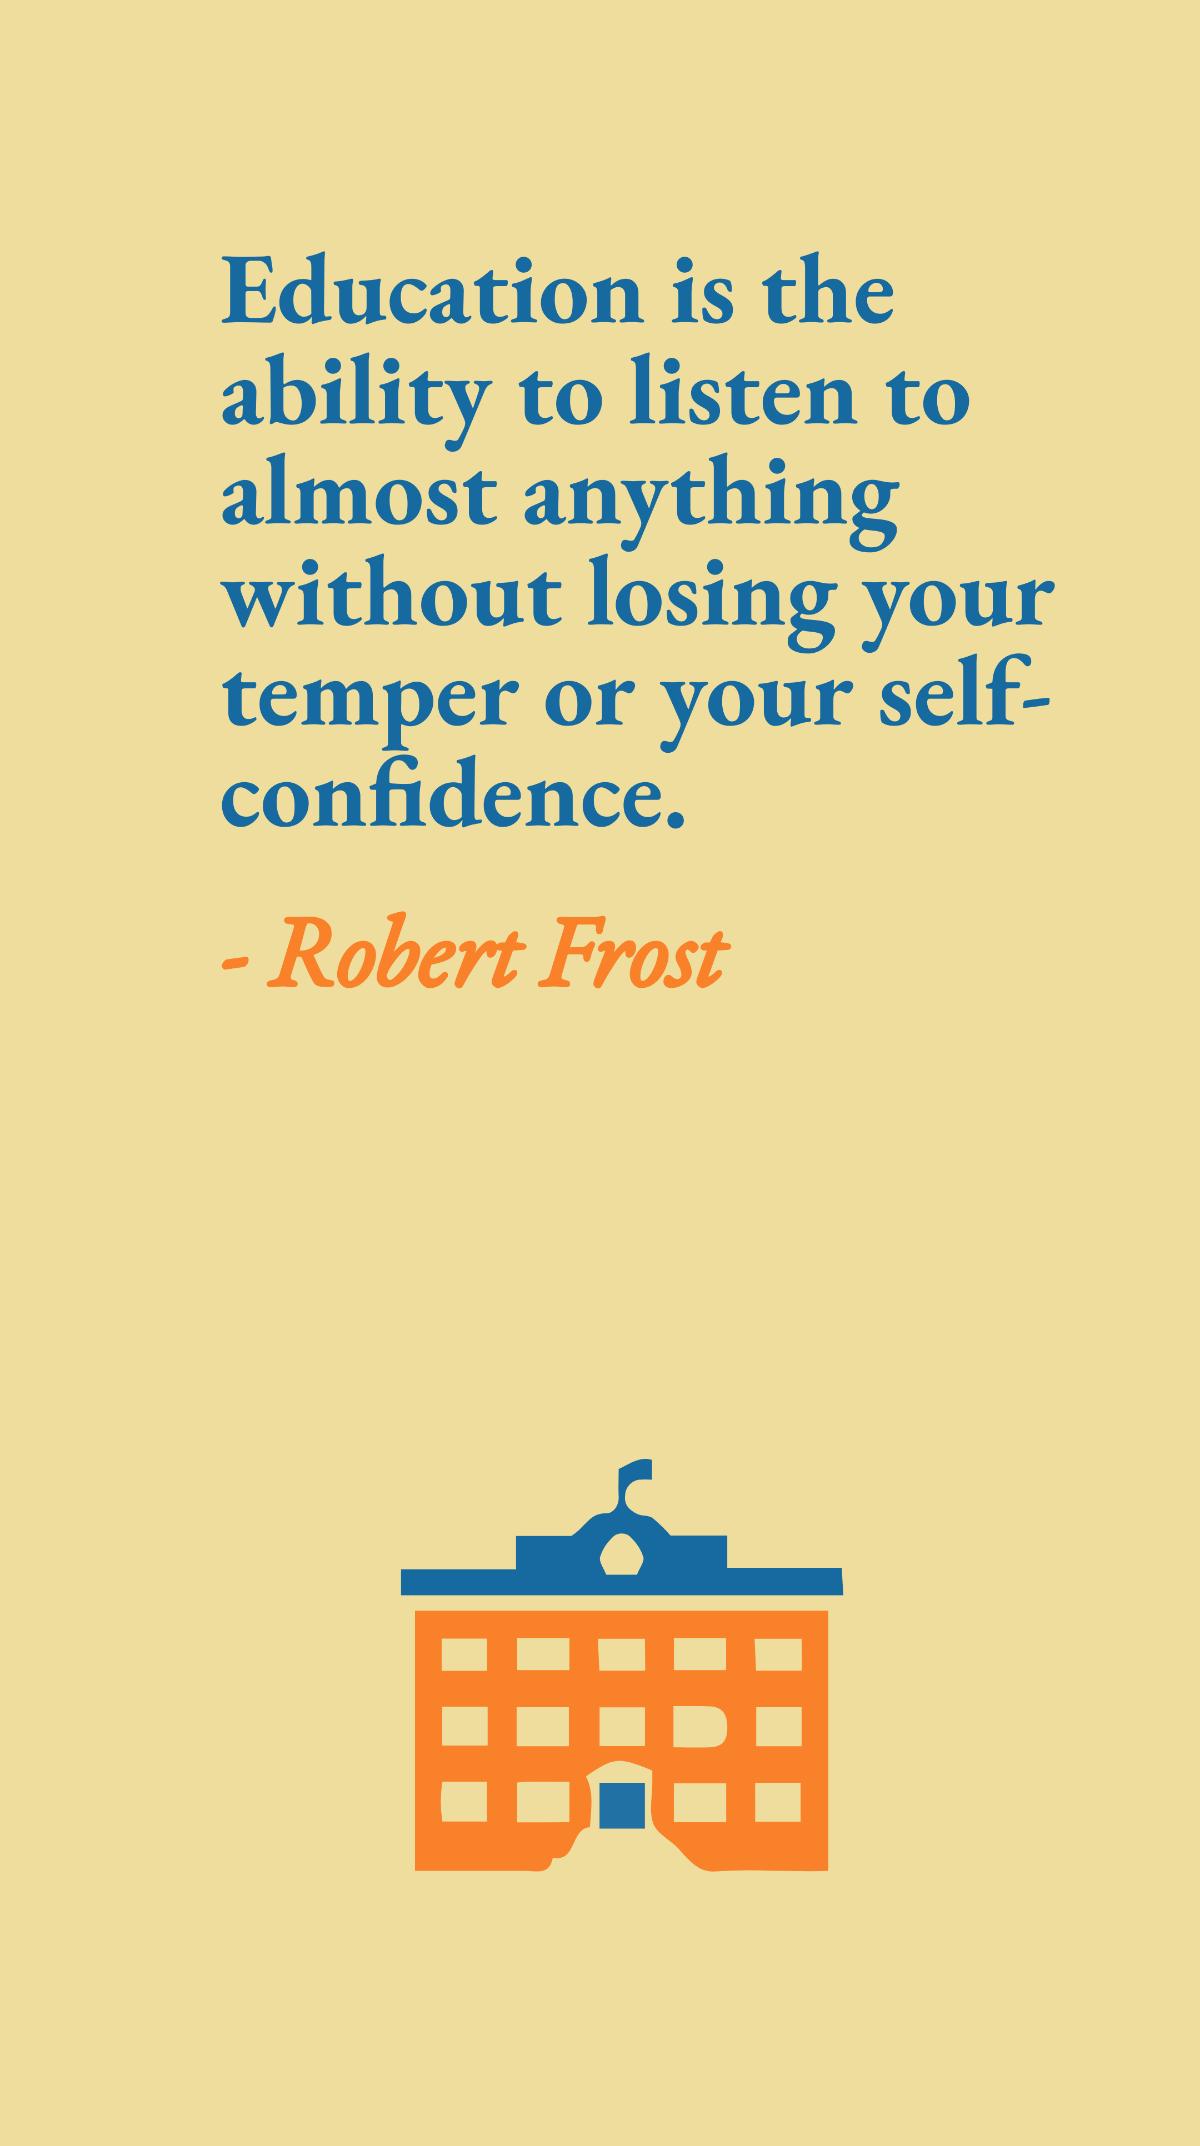 Robert Frost - Education is the ability to listen to almost anything without losing your temper or your self-confidence. Template